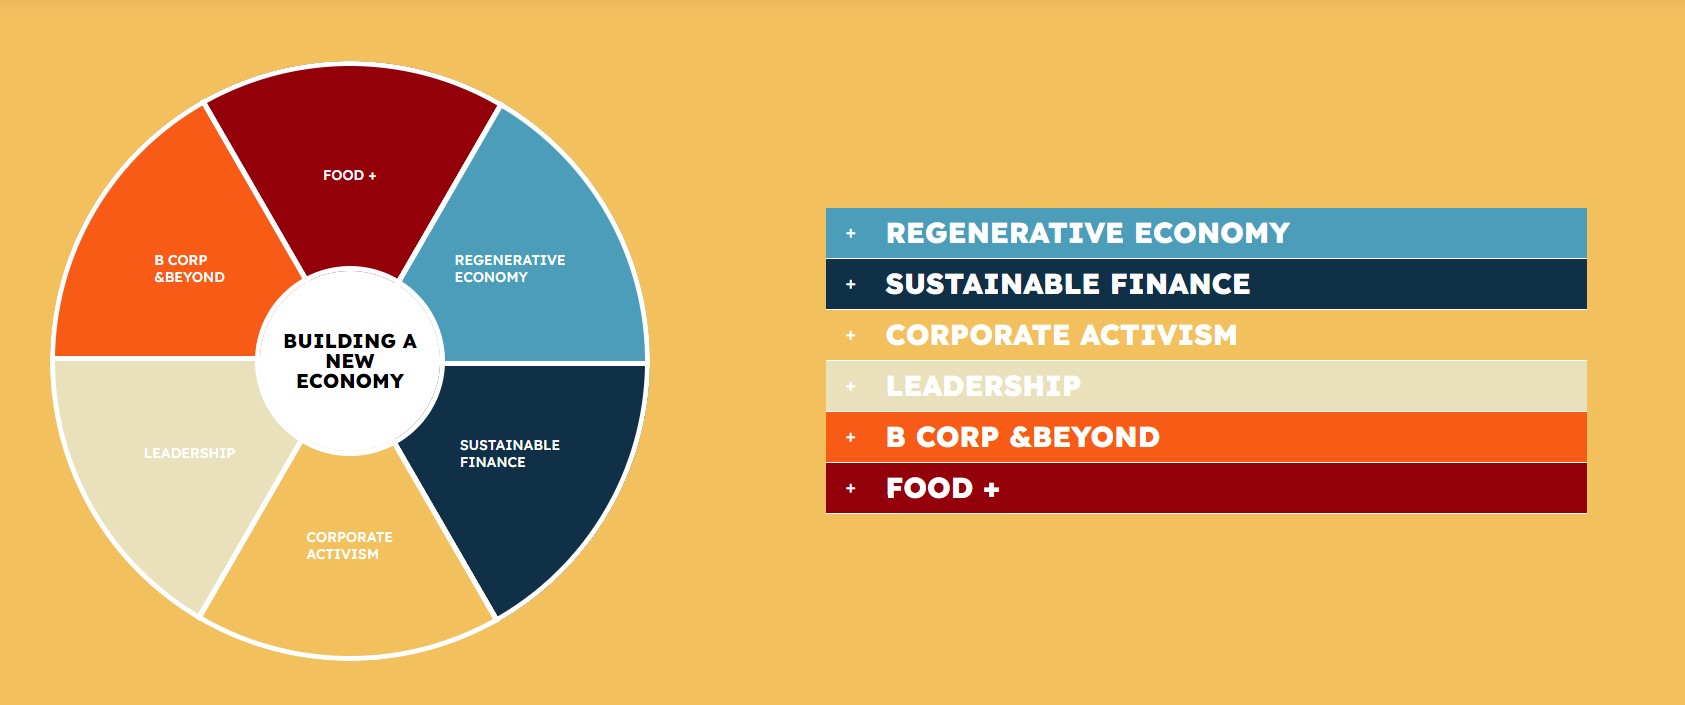 Graphic with "Buidling a new economy" in the center, surrounded by the 6 tracks; Food +, Regenerative Economy, Sustainable Finance, Corporate Activism, Leadership and B Corp &Beyond